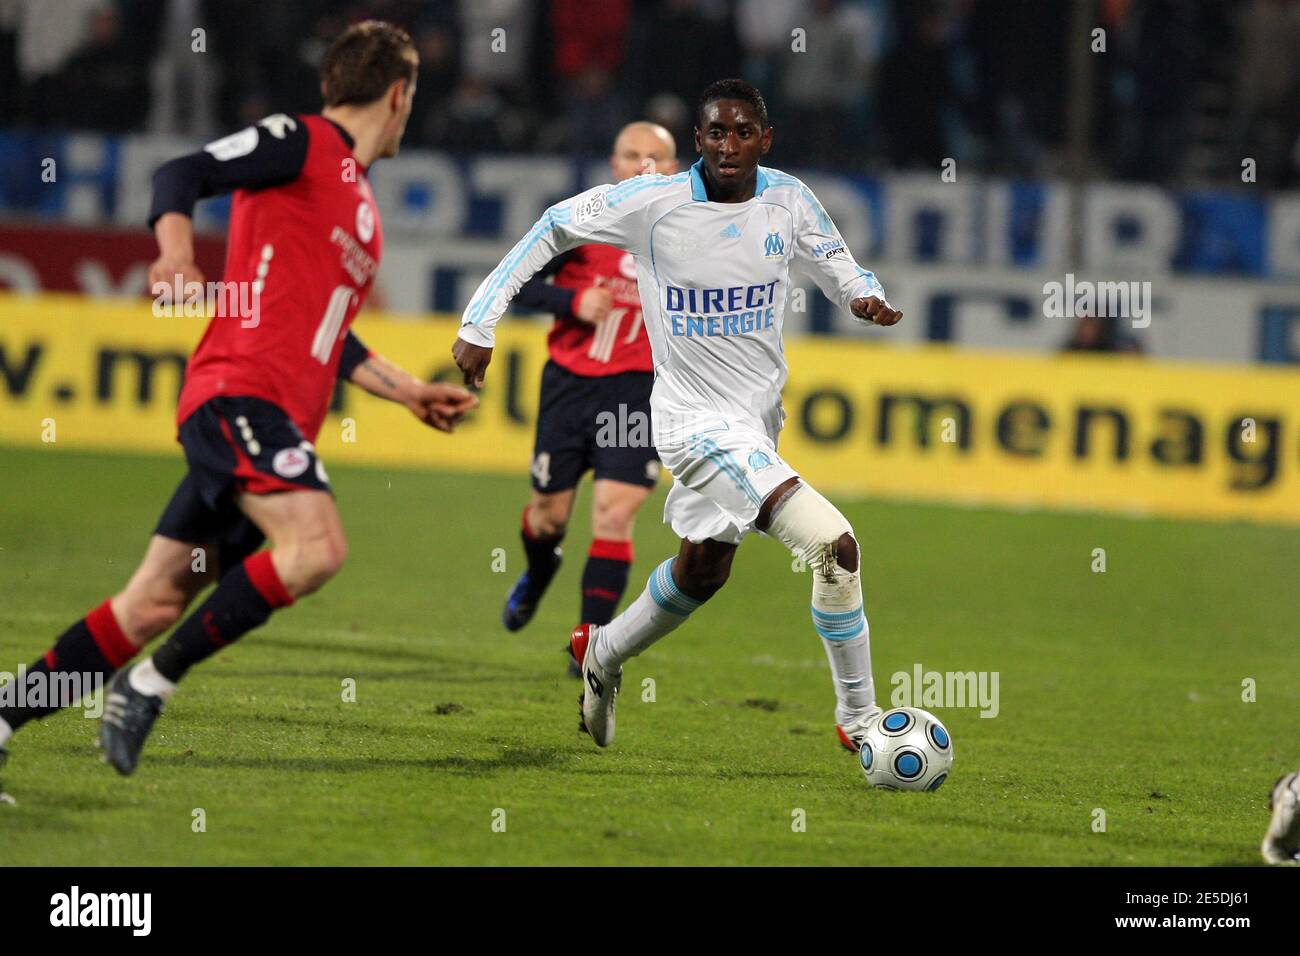 Marseille's Mamadou Samassa during the First League Soccer match, Olympique  de Marseille vs LOSC Lille MÀtropole at the Stade Velodrome in Marseille,  France on November 23, 2008. The match ended in a